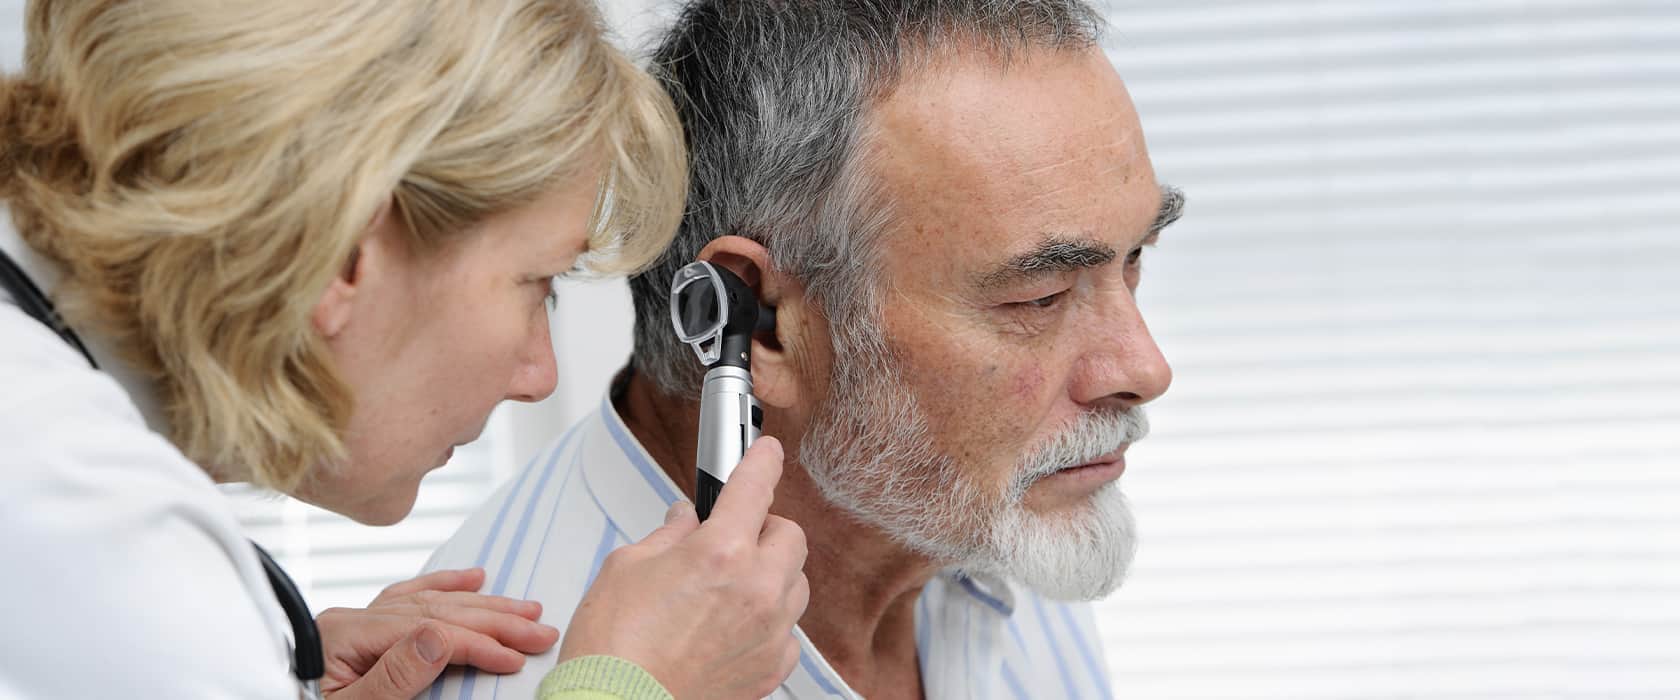 senior safety - protect your hearing and vision